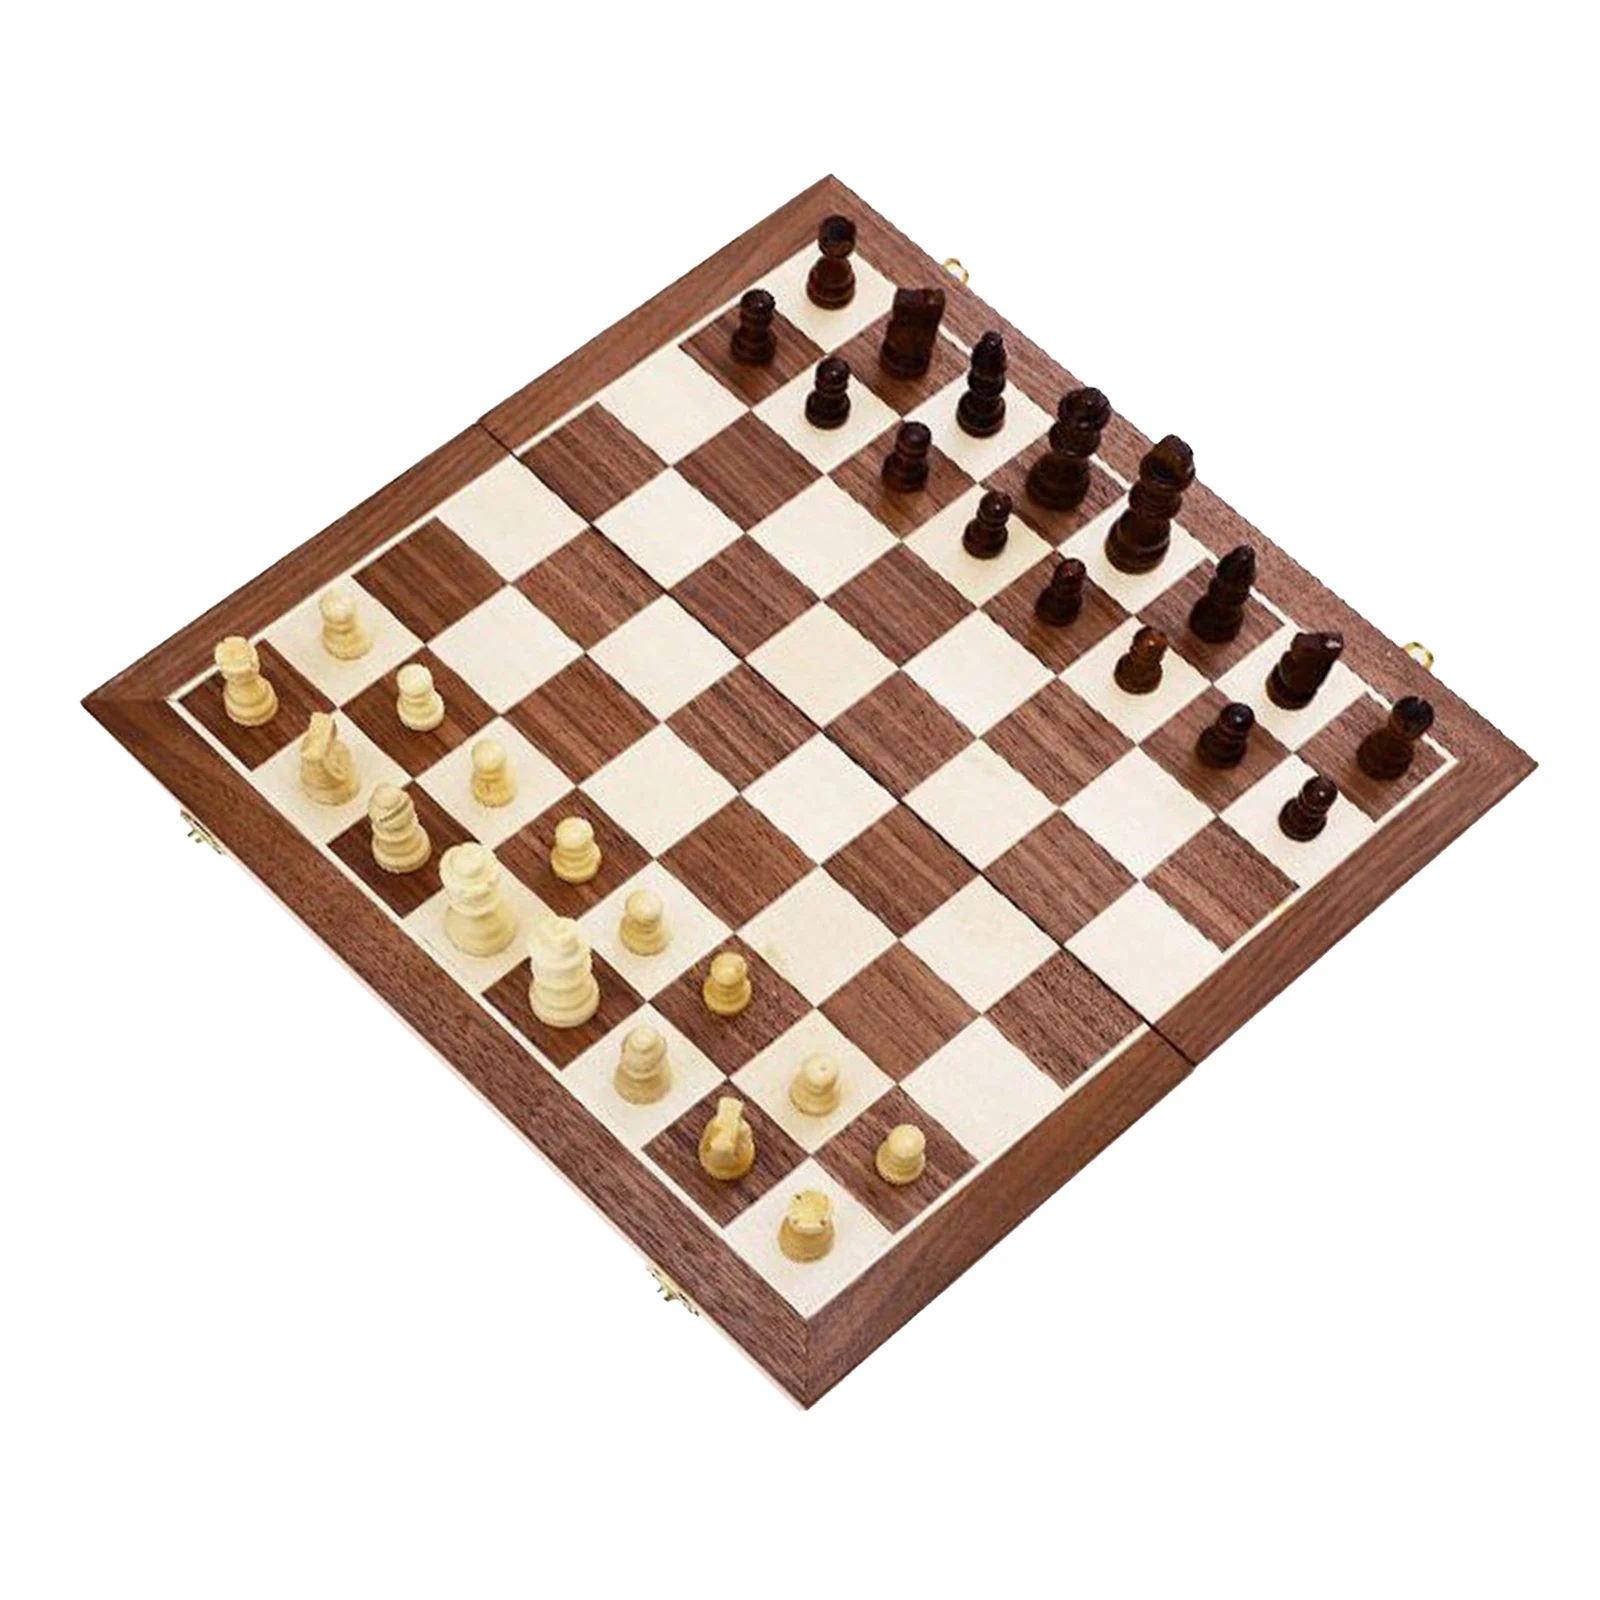 Wooden International Chess Set Foldable Chess Board Storage Space Chessboard 32x Pieces for Kids Adult Festival Gift